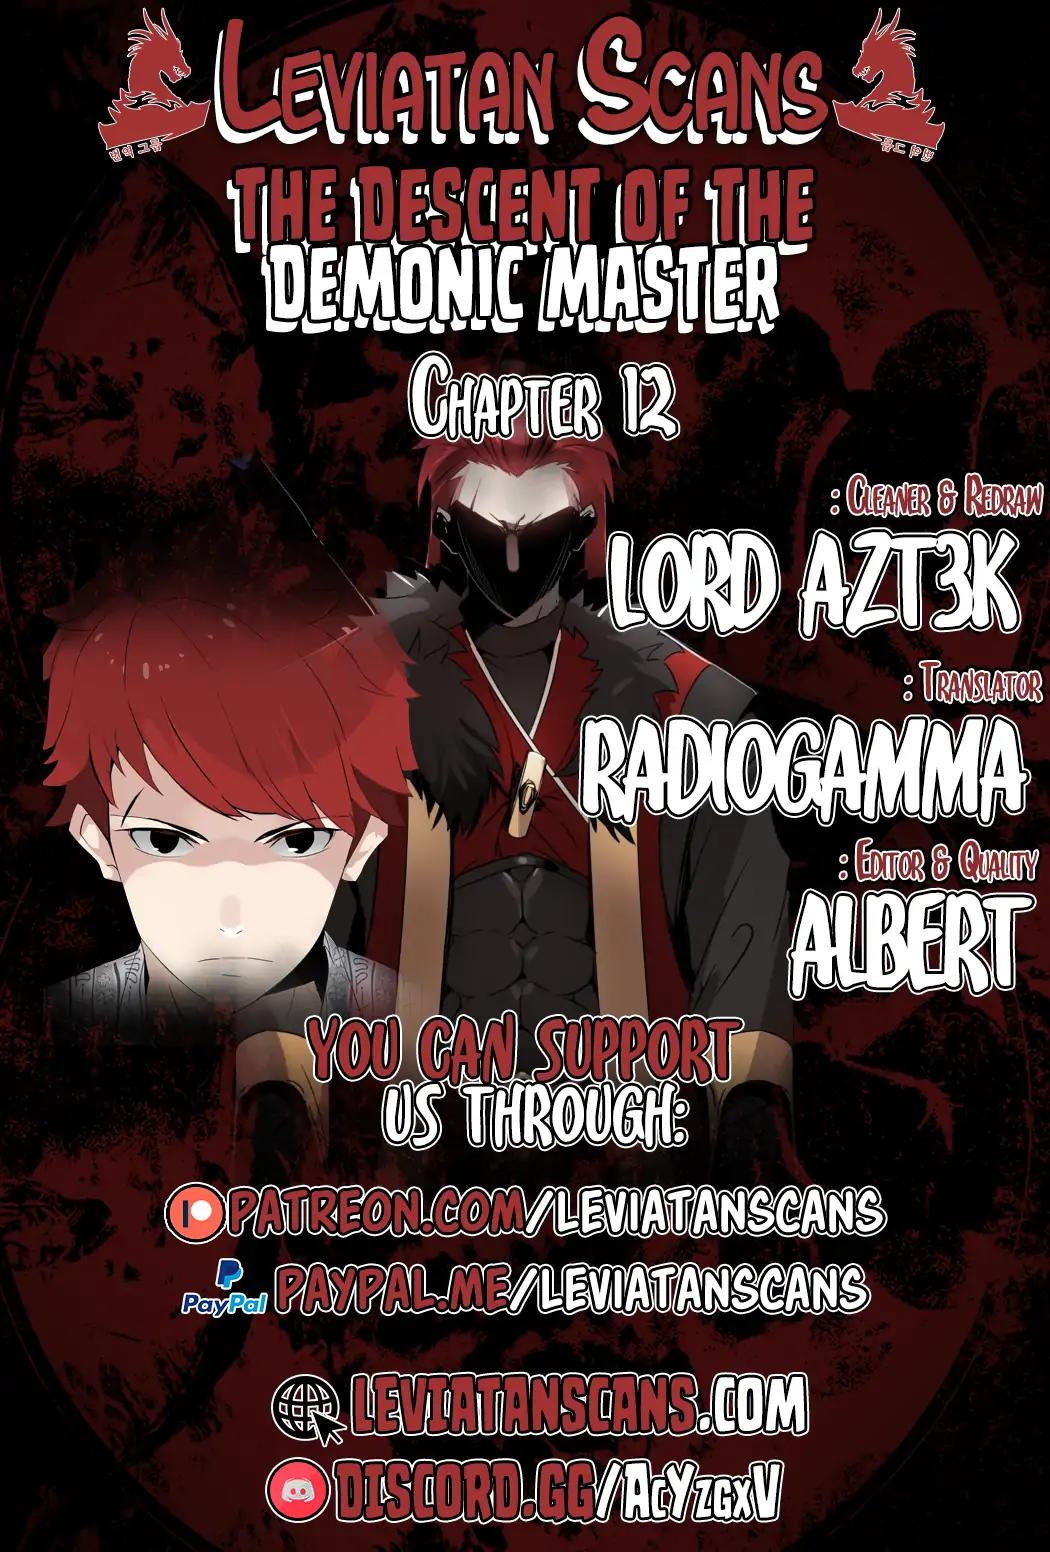 The Descent of the Demonic Master Chapter 12